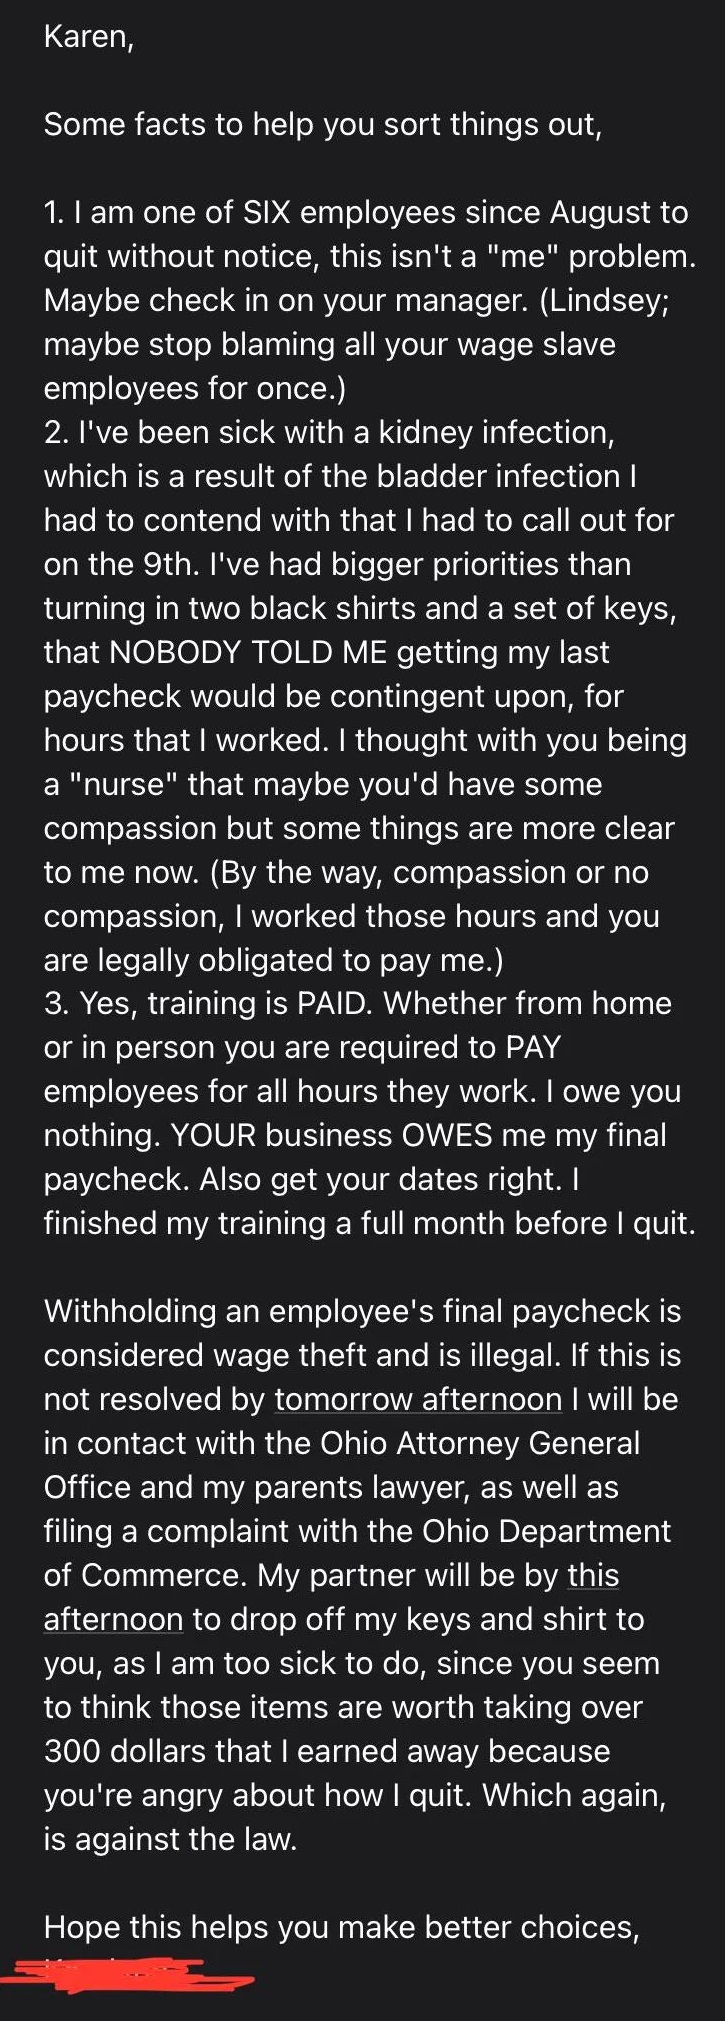 Bosses Owned by Employees  --  Karen Some facts to help you sort things out 1. I am one of Six employees since August to quit without notice this isn't a 'me problem Maybe check in on your manager. Lindsey maybe stop blaming all your wage slave employees 